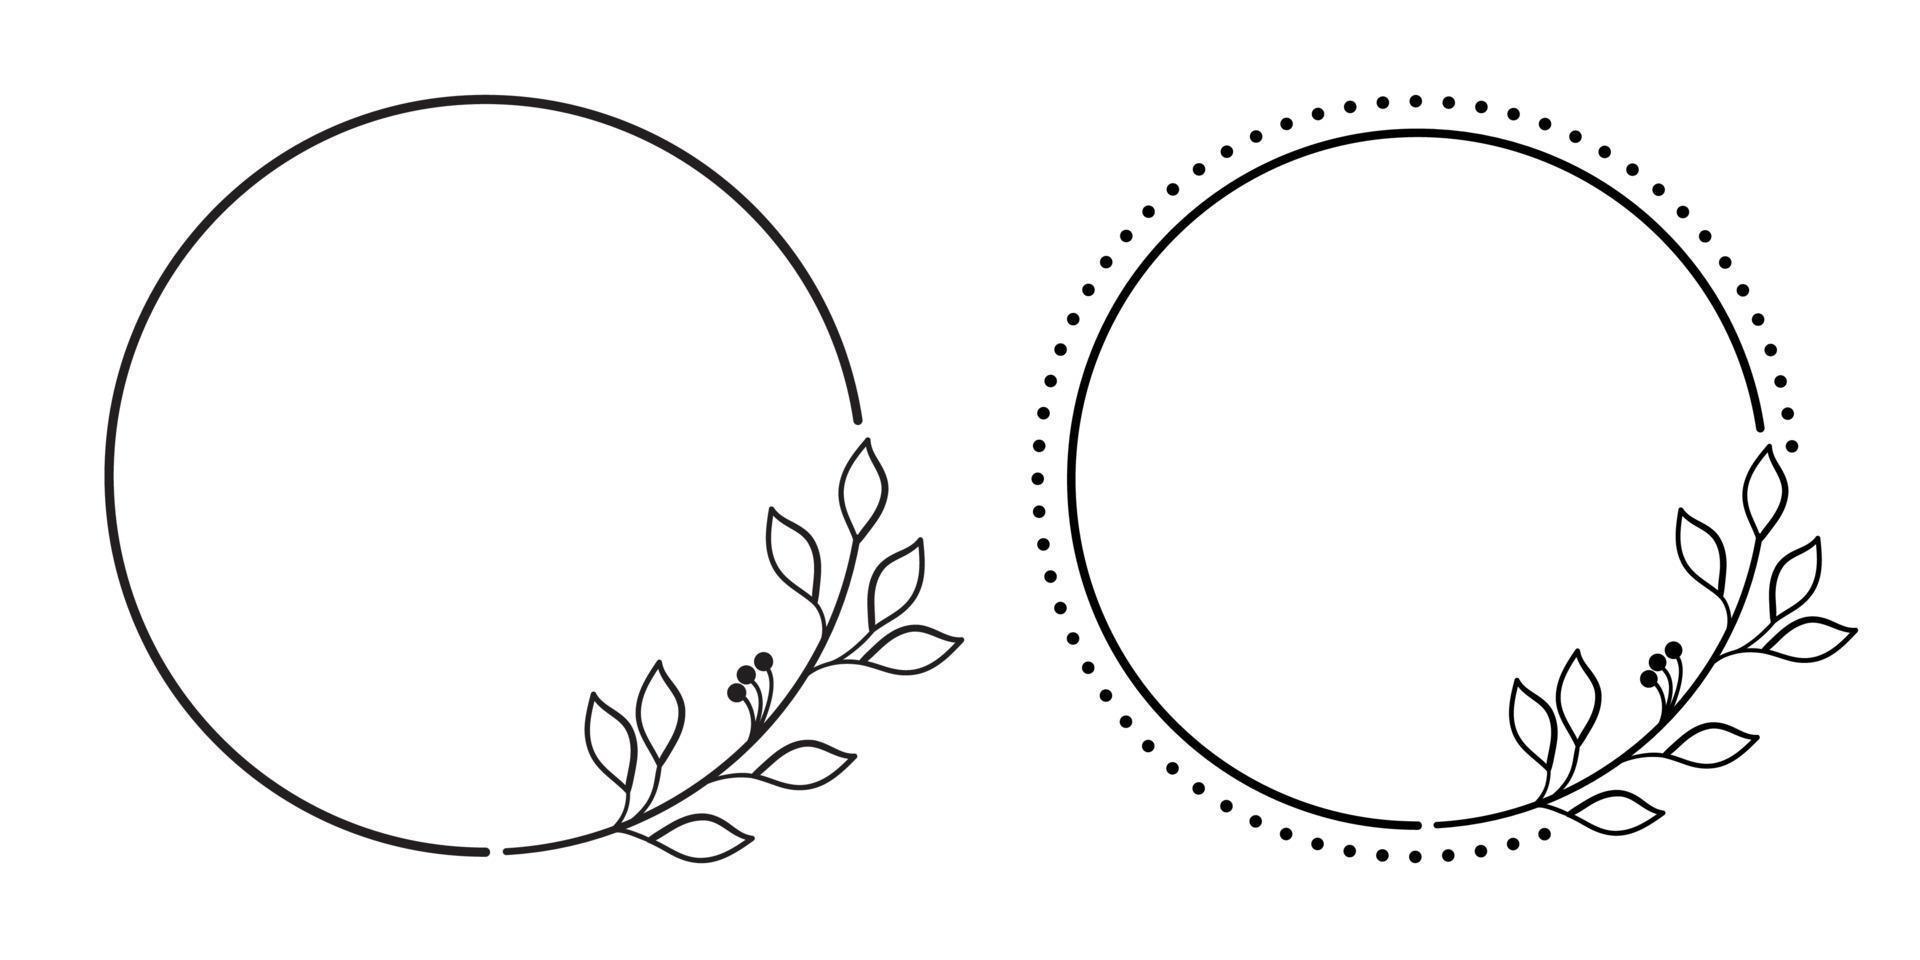 Frame from floral elements. Vector black and white round frame, border, divider, circle shape, branches and leaves. Drawn line art elements, naturalness and minimalism. Trending style for wedding